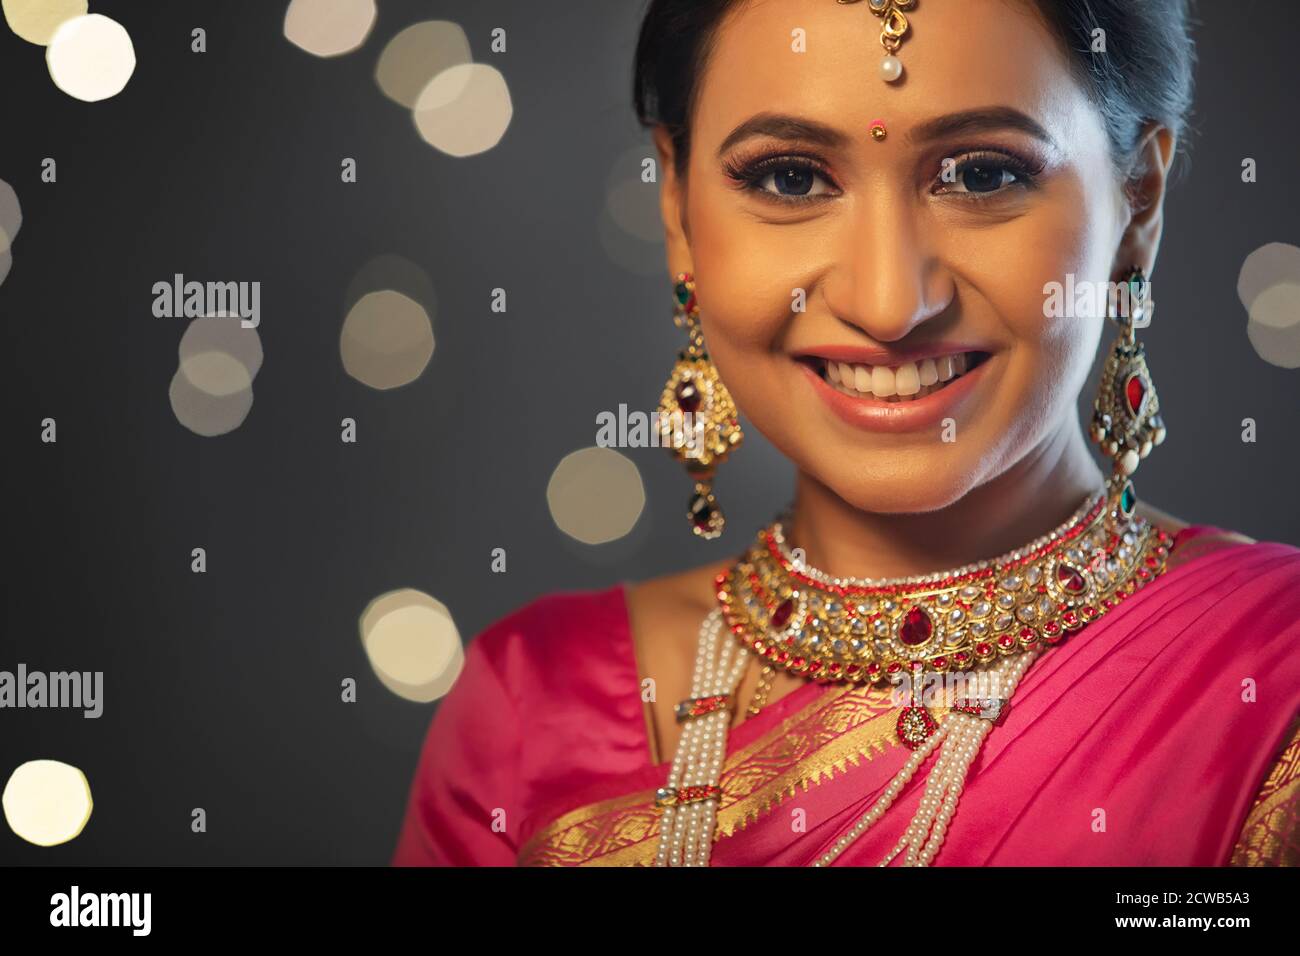 Woman in ethnic outfit smiling on the occasion of Diwali Stock Photo